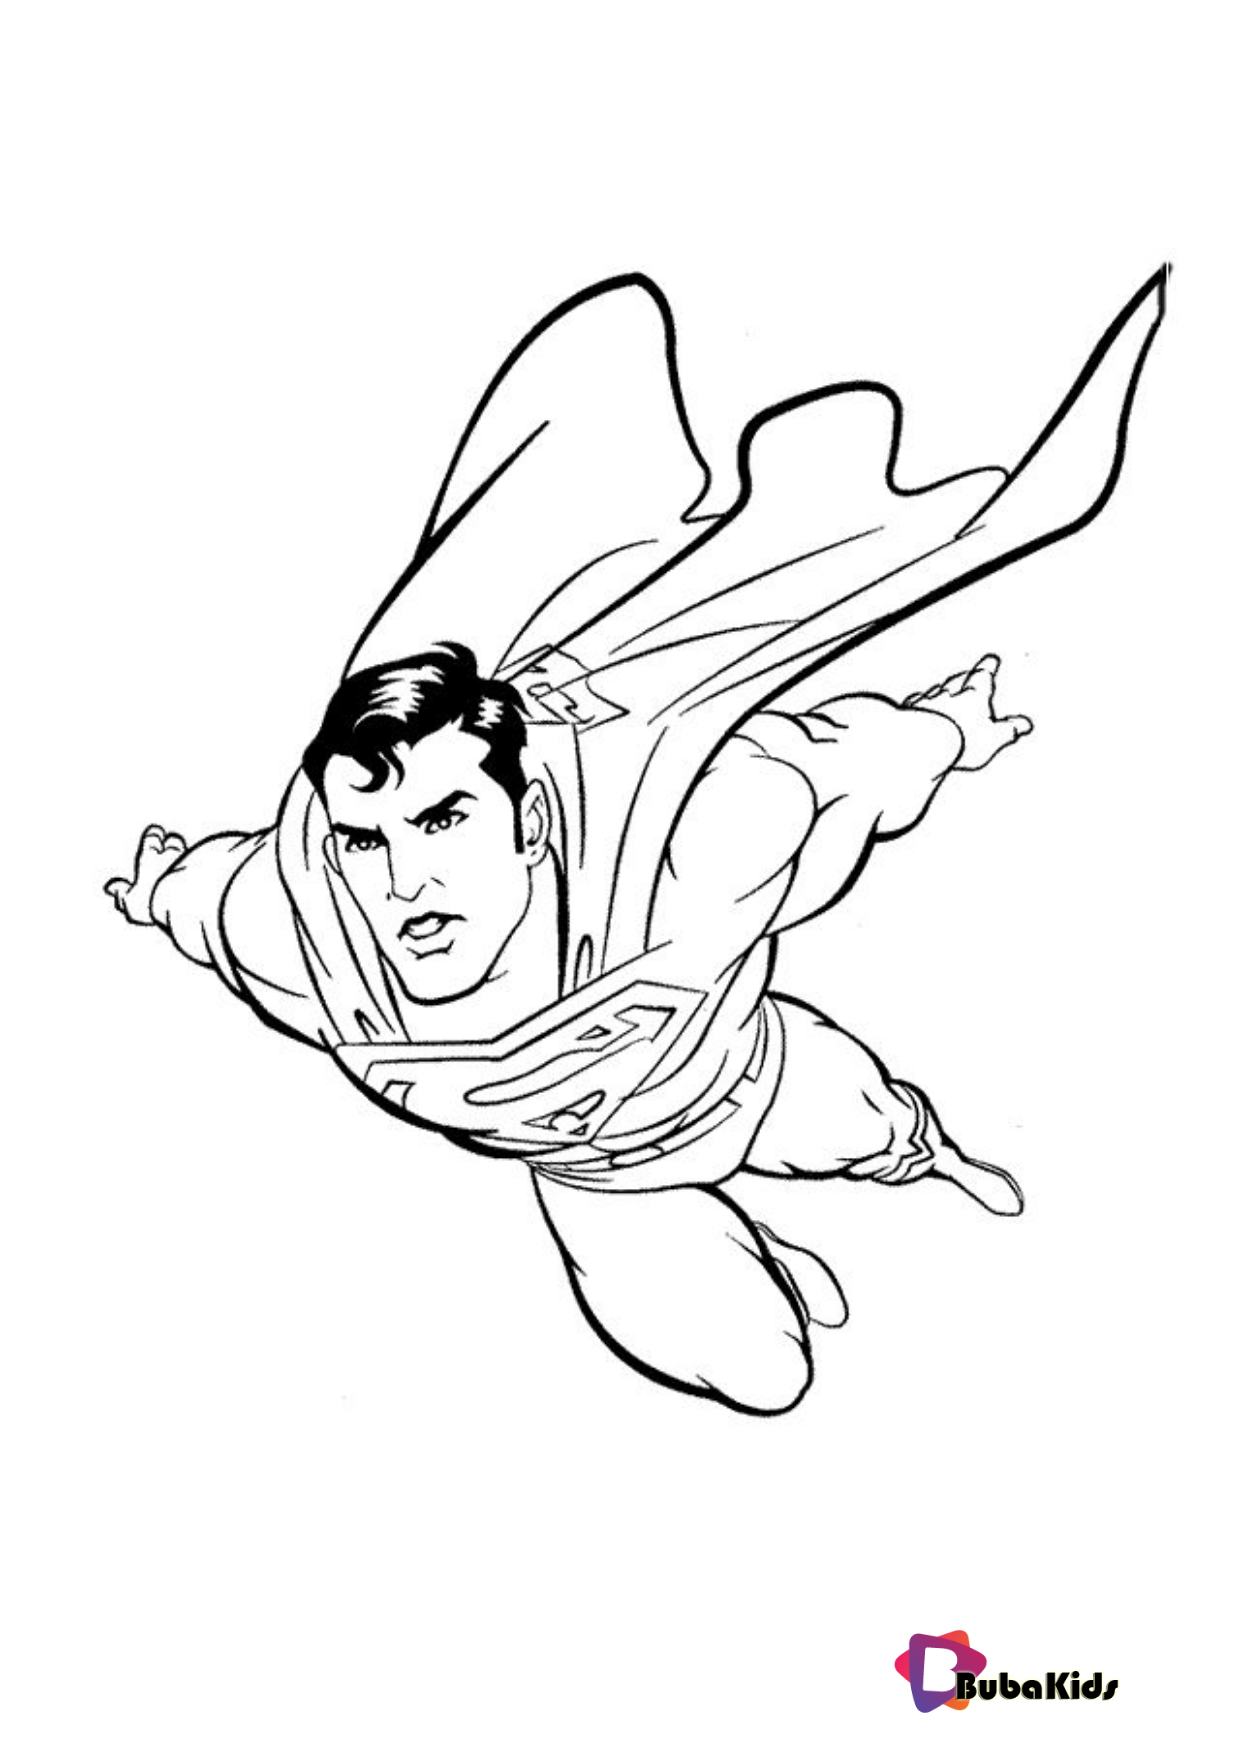 Superman printable Coloring Pages on bubakids.com Wallpaper